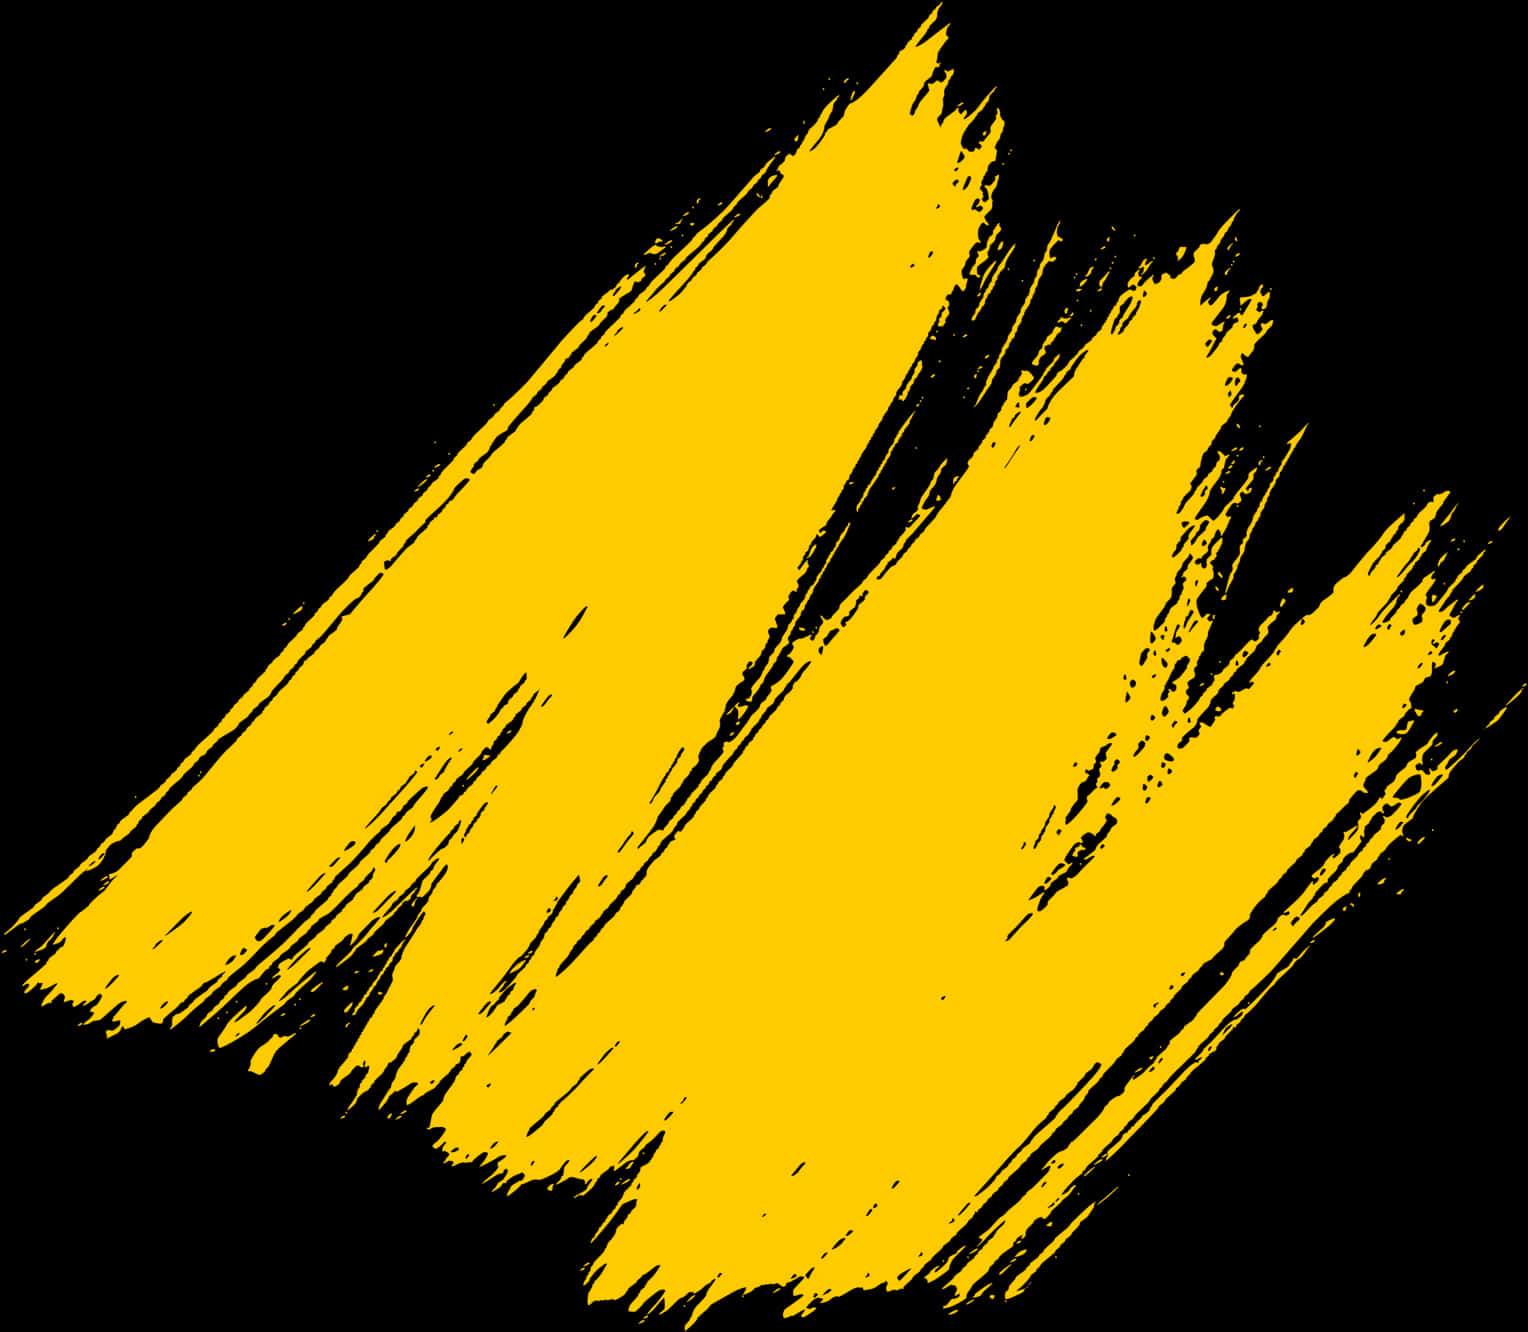 A Yellow Brushstroke On A Black Background